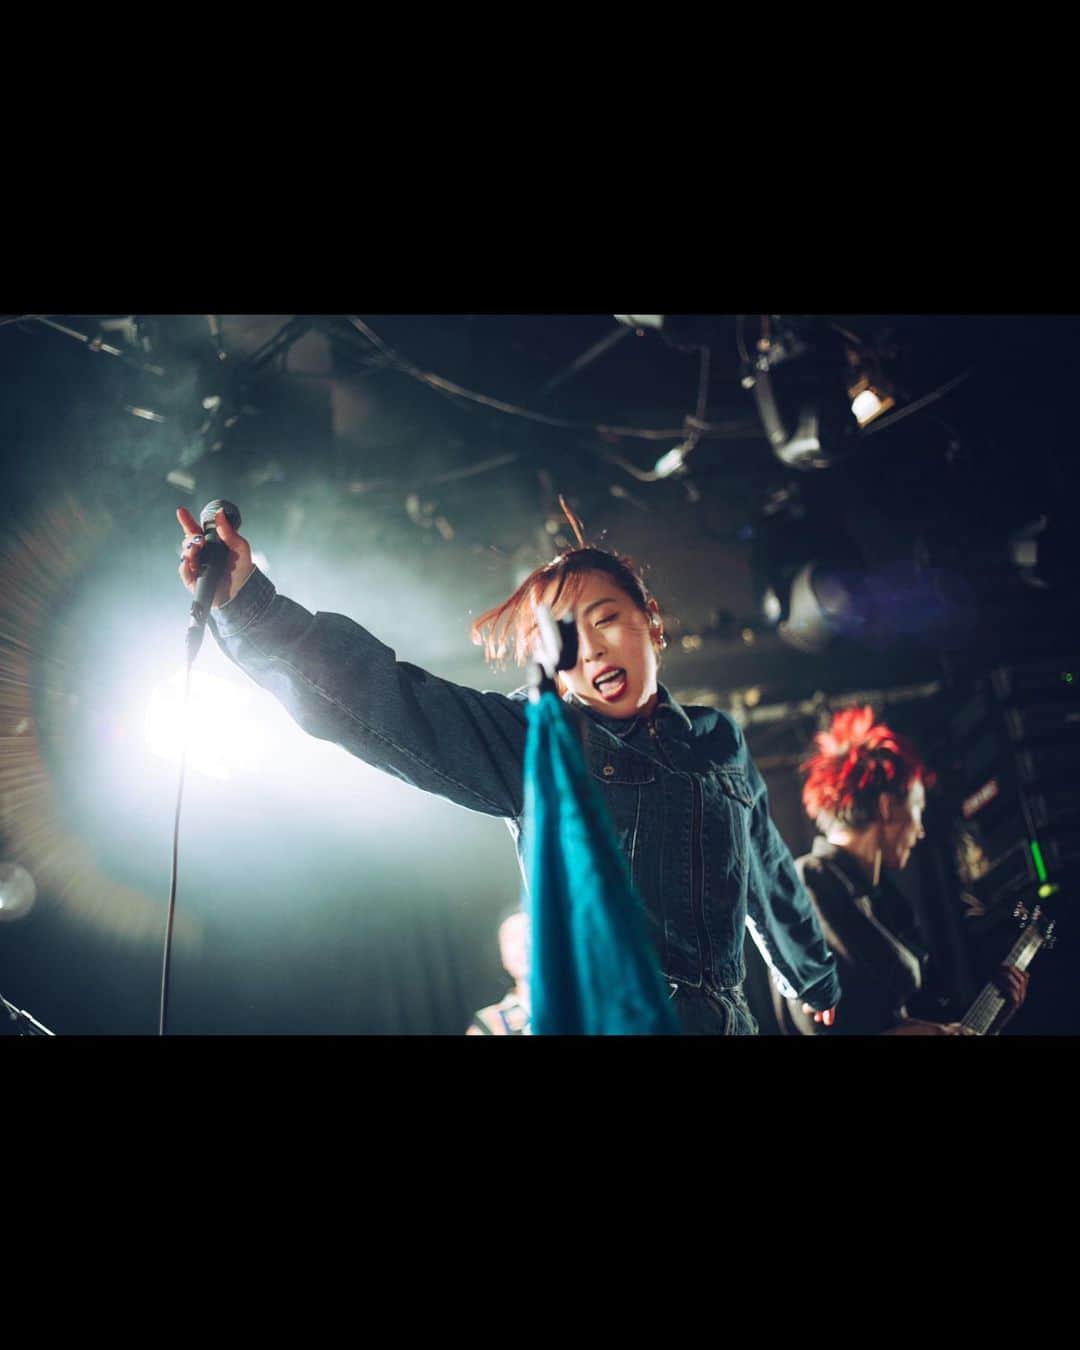 EOWのインスタグラム：「LIVE Photo📸 2023.10.16 📍 @shibuya_eggman   M1「最低な日々」 M2「ON」 M3「嫌んなるわ」 M4「Lyfe」 M5「百花」 M6「(this is the) DAY」  Photo by @yoshrum   #eow #live #photo  Japan-based band EOW infuses pop with rock,funk,R&B so on. EOW songs are often marked by strong vocals and vocal harmonies. Their animated sound is further defined by the members’ backgrounds in gospel, funk, and electronic music. The band's unique sound is titled "eowtional pop" it shakes your heart emotionally and the body starts to move. Stay up to date on their activity by following them on Instagram, X*twitter, TikTok.」